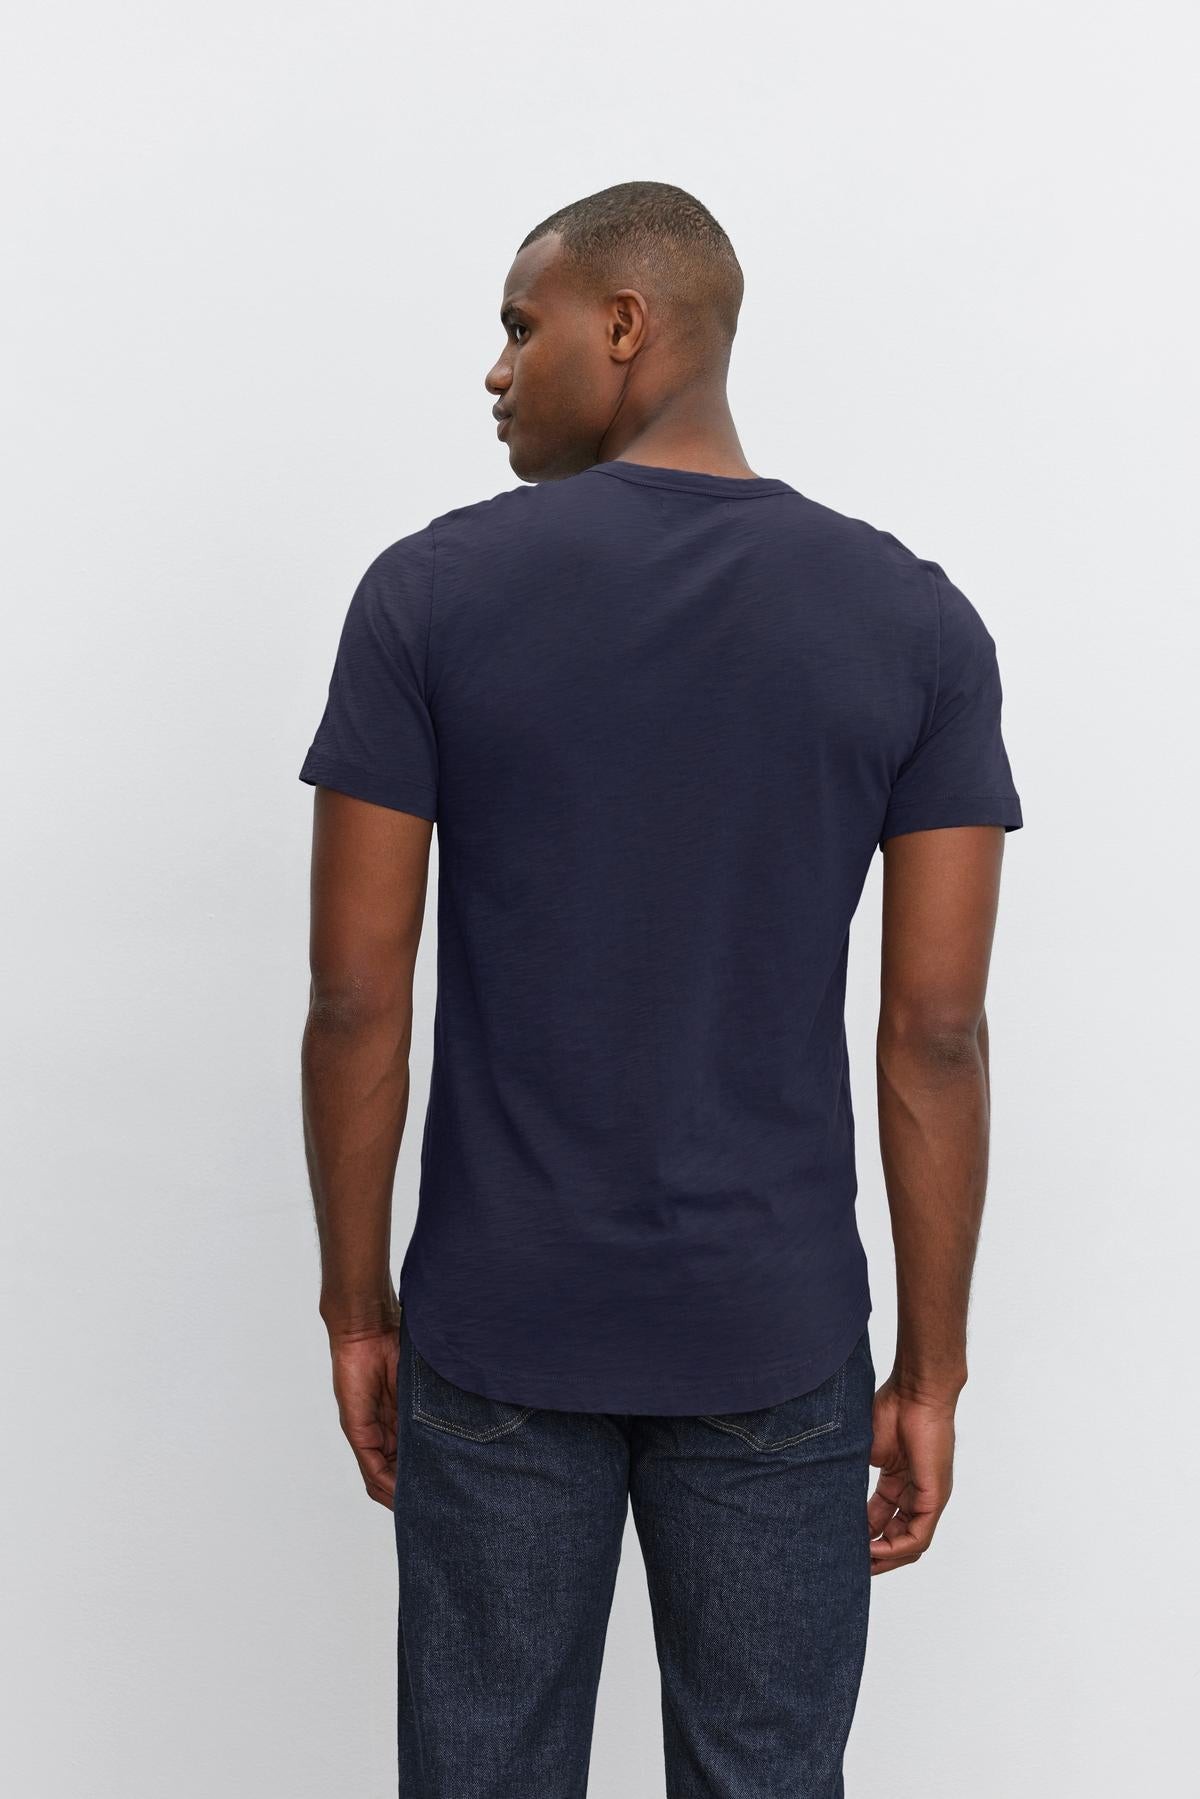 Man wearing a dark blue Velvet by Graham & Spencer crew neck AMARO TEE with heathered texture and denim jeans standing against a white background, viewed from behind.-36273921949889